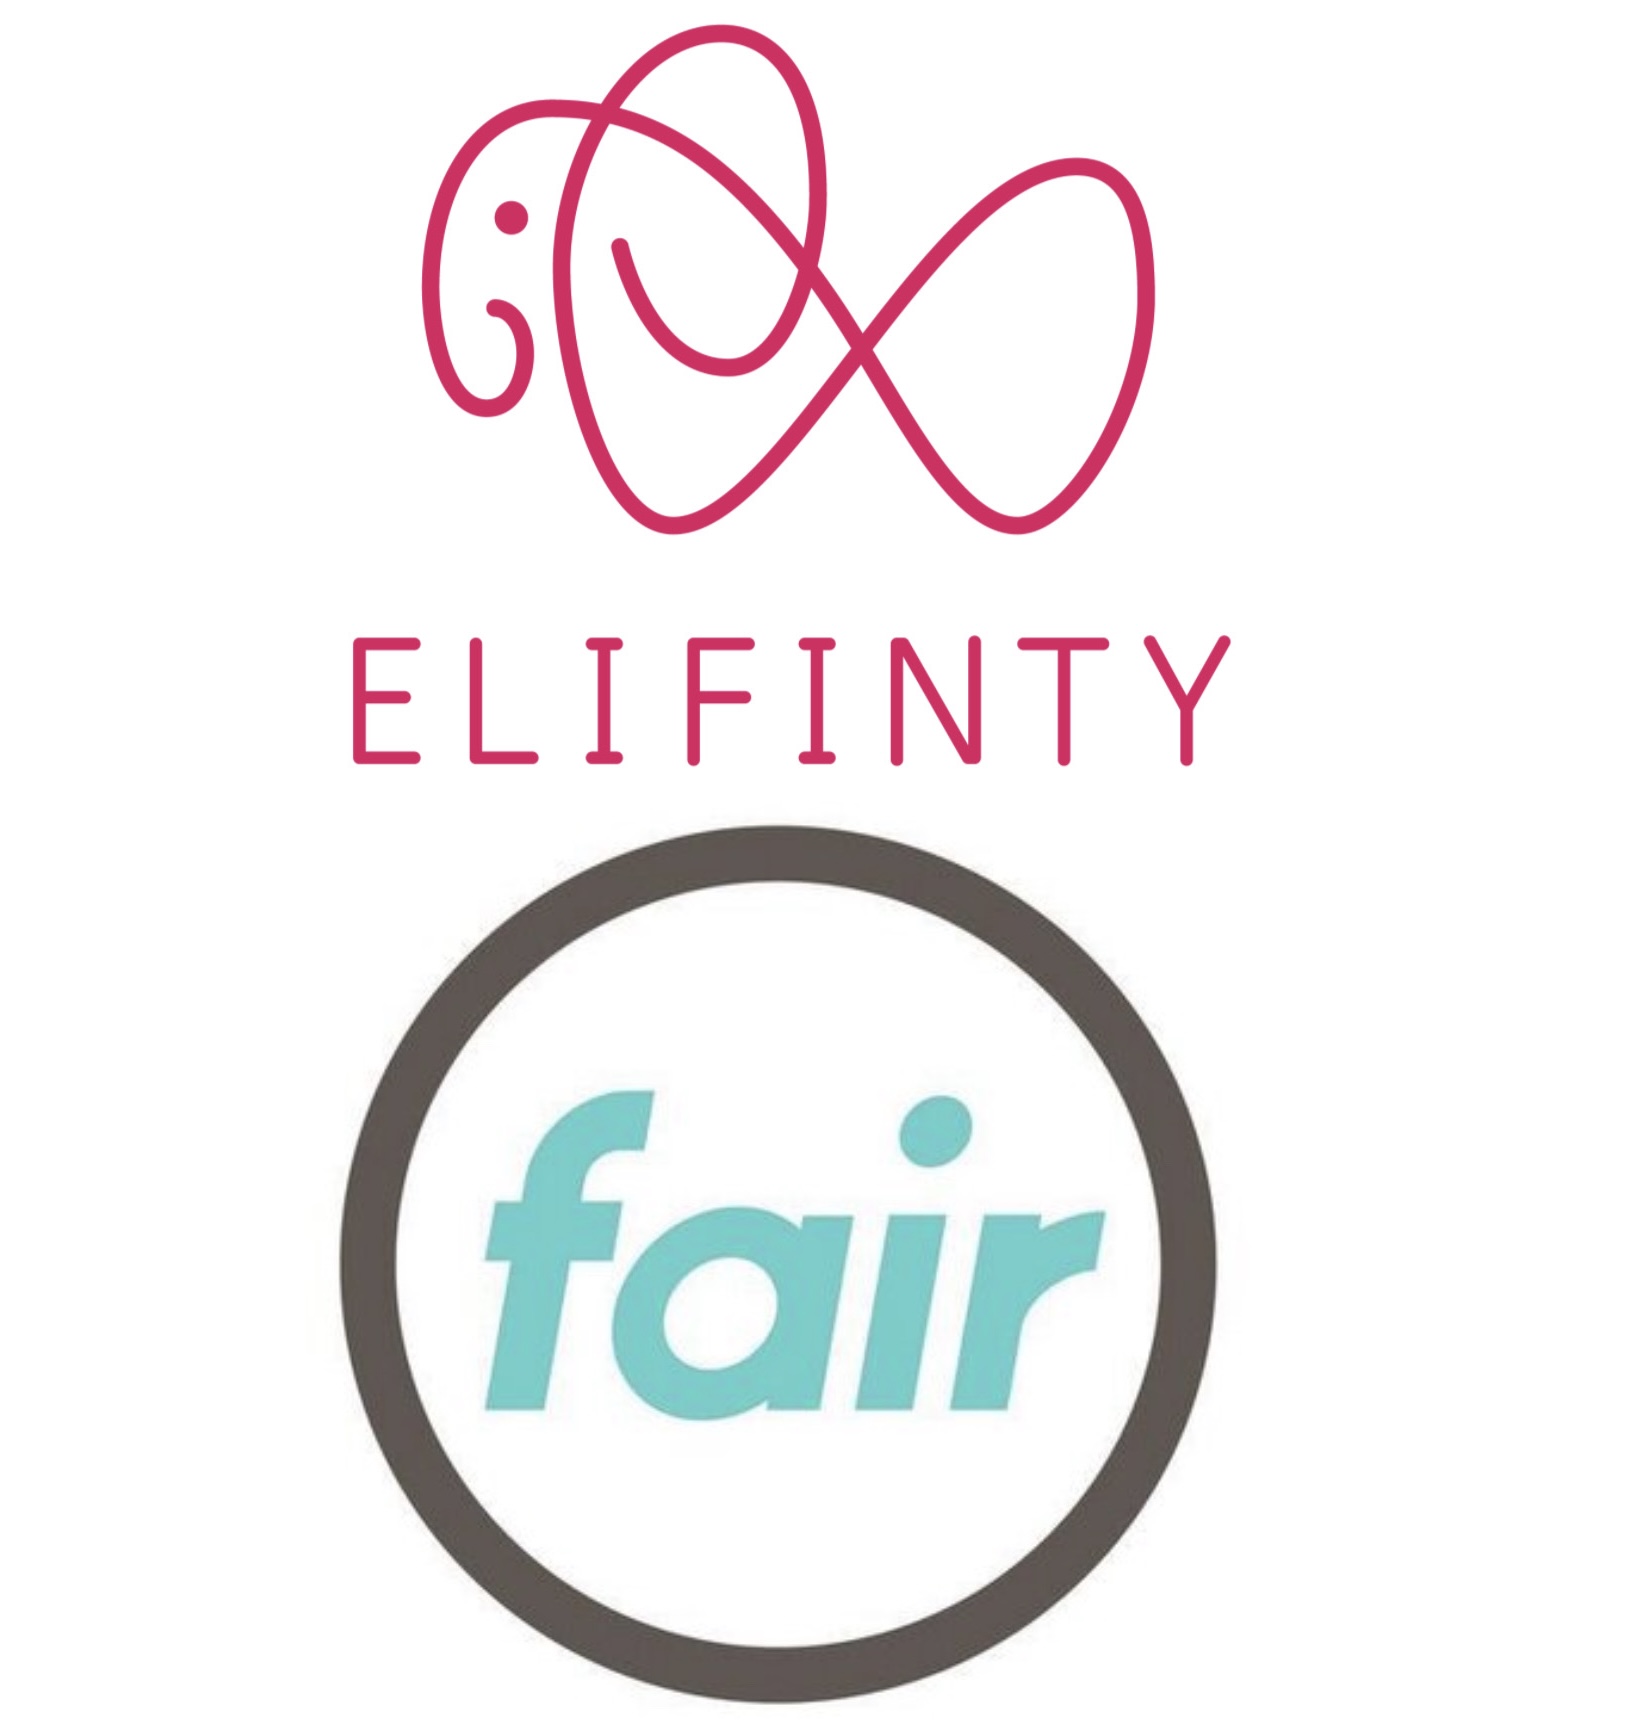 Elifinty & Fair Money Advice Partner to Disrupt Debt Advice Space